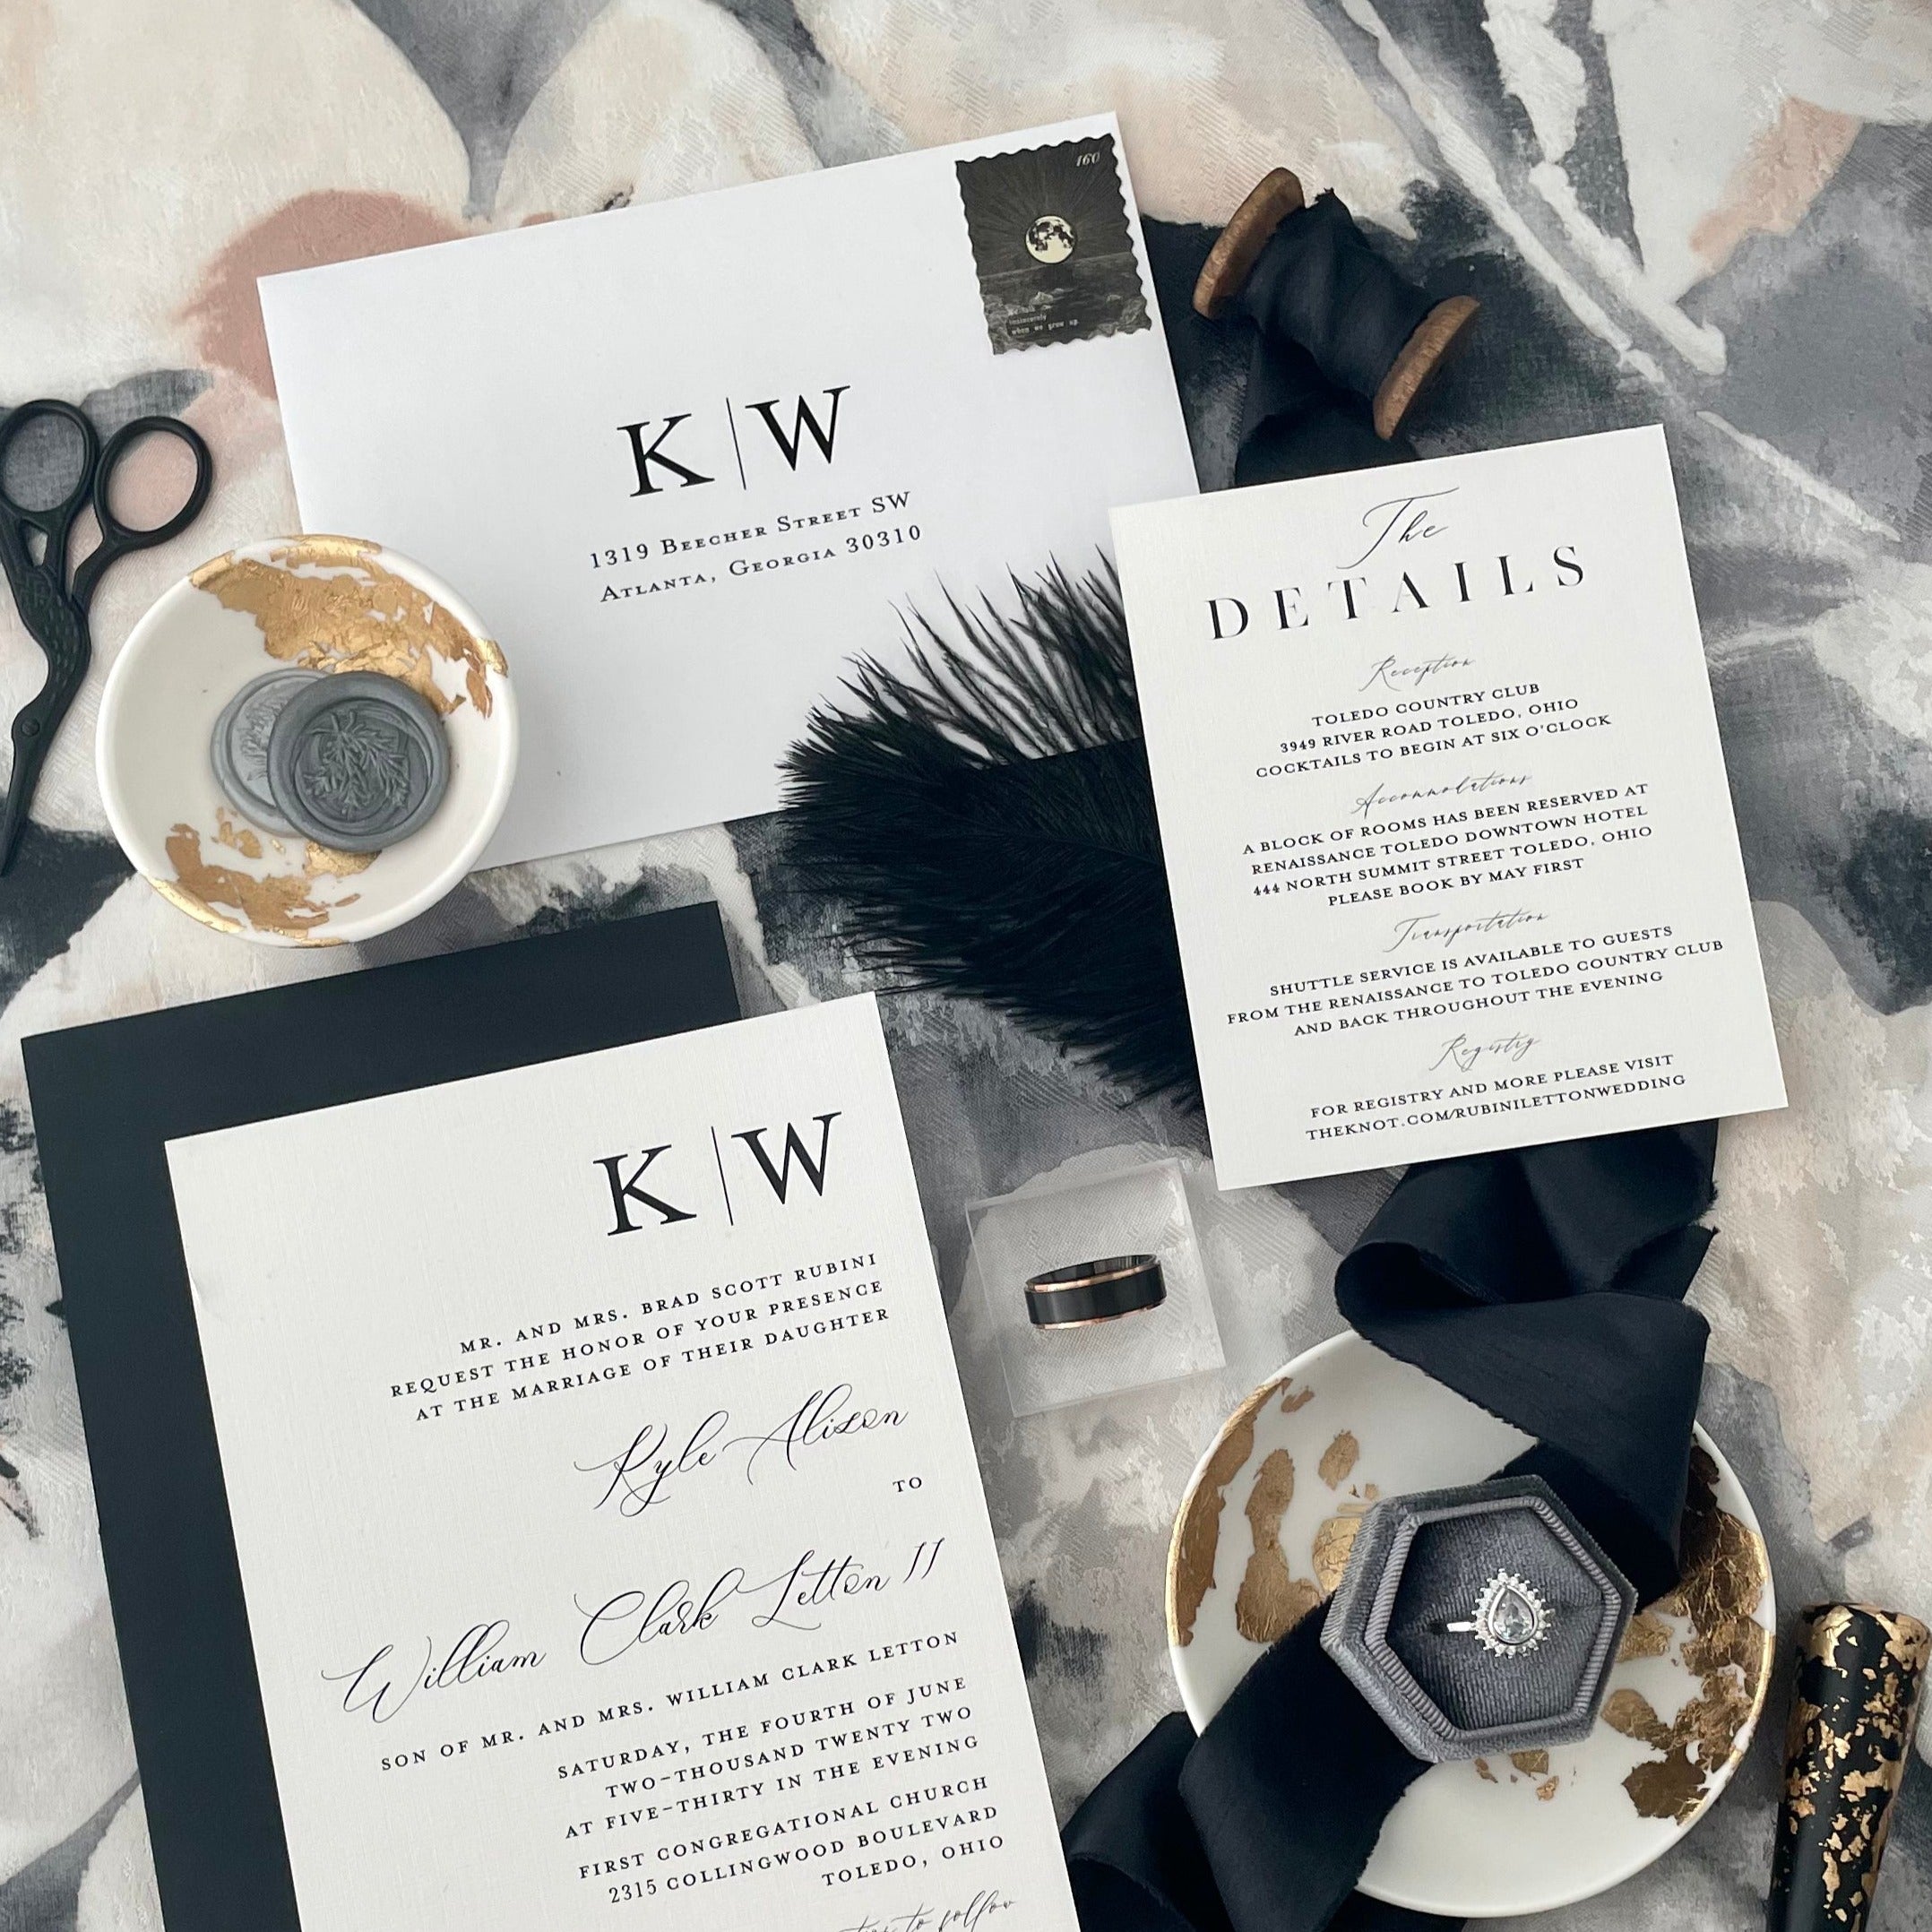 Black and gold wedding flat lay with wedding invitation, gray ring box, black ribbon, gray was seals in white and gold dish, and vintage black scissors - Wedding Flat lay props from Champagne & GRIT